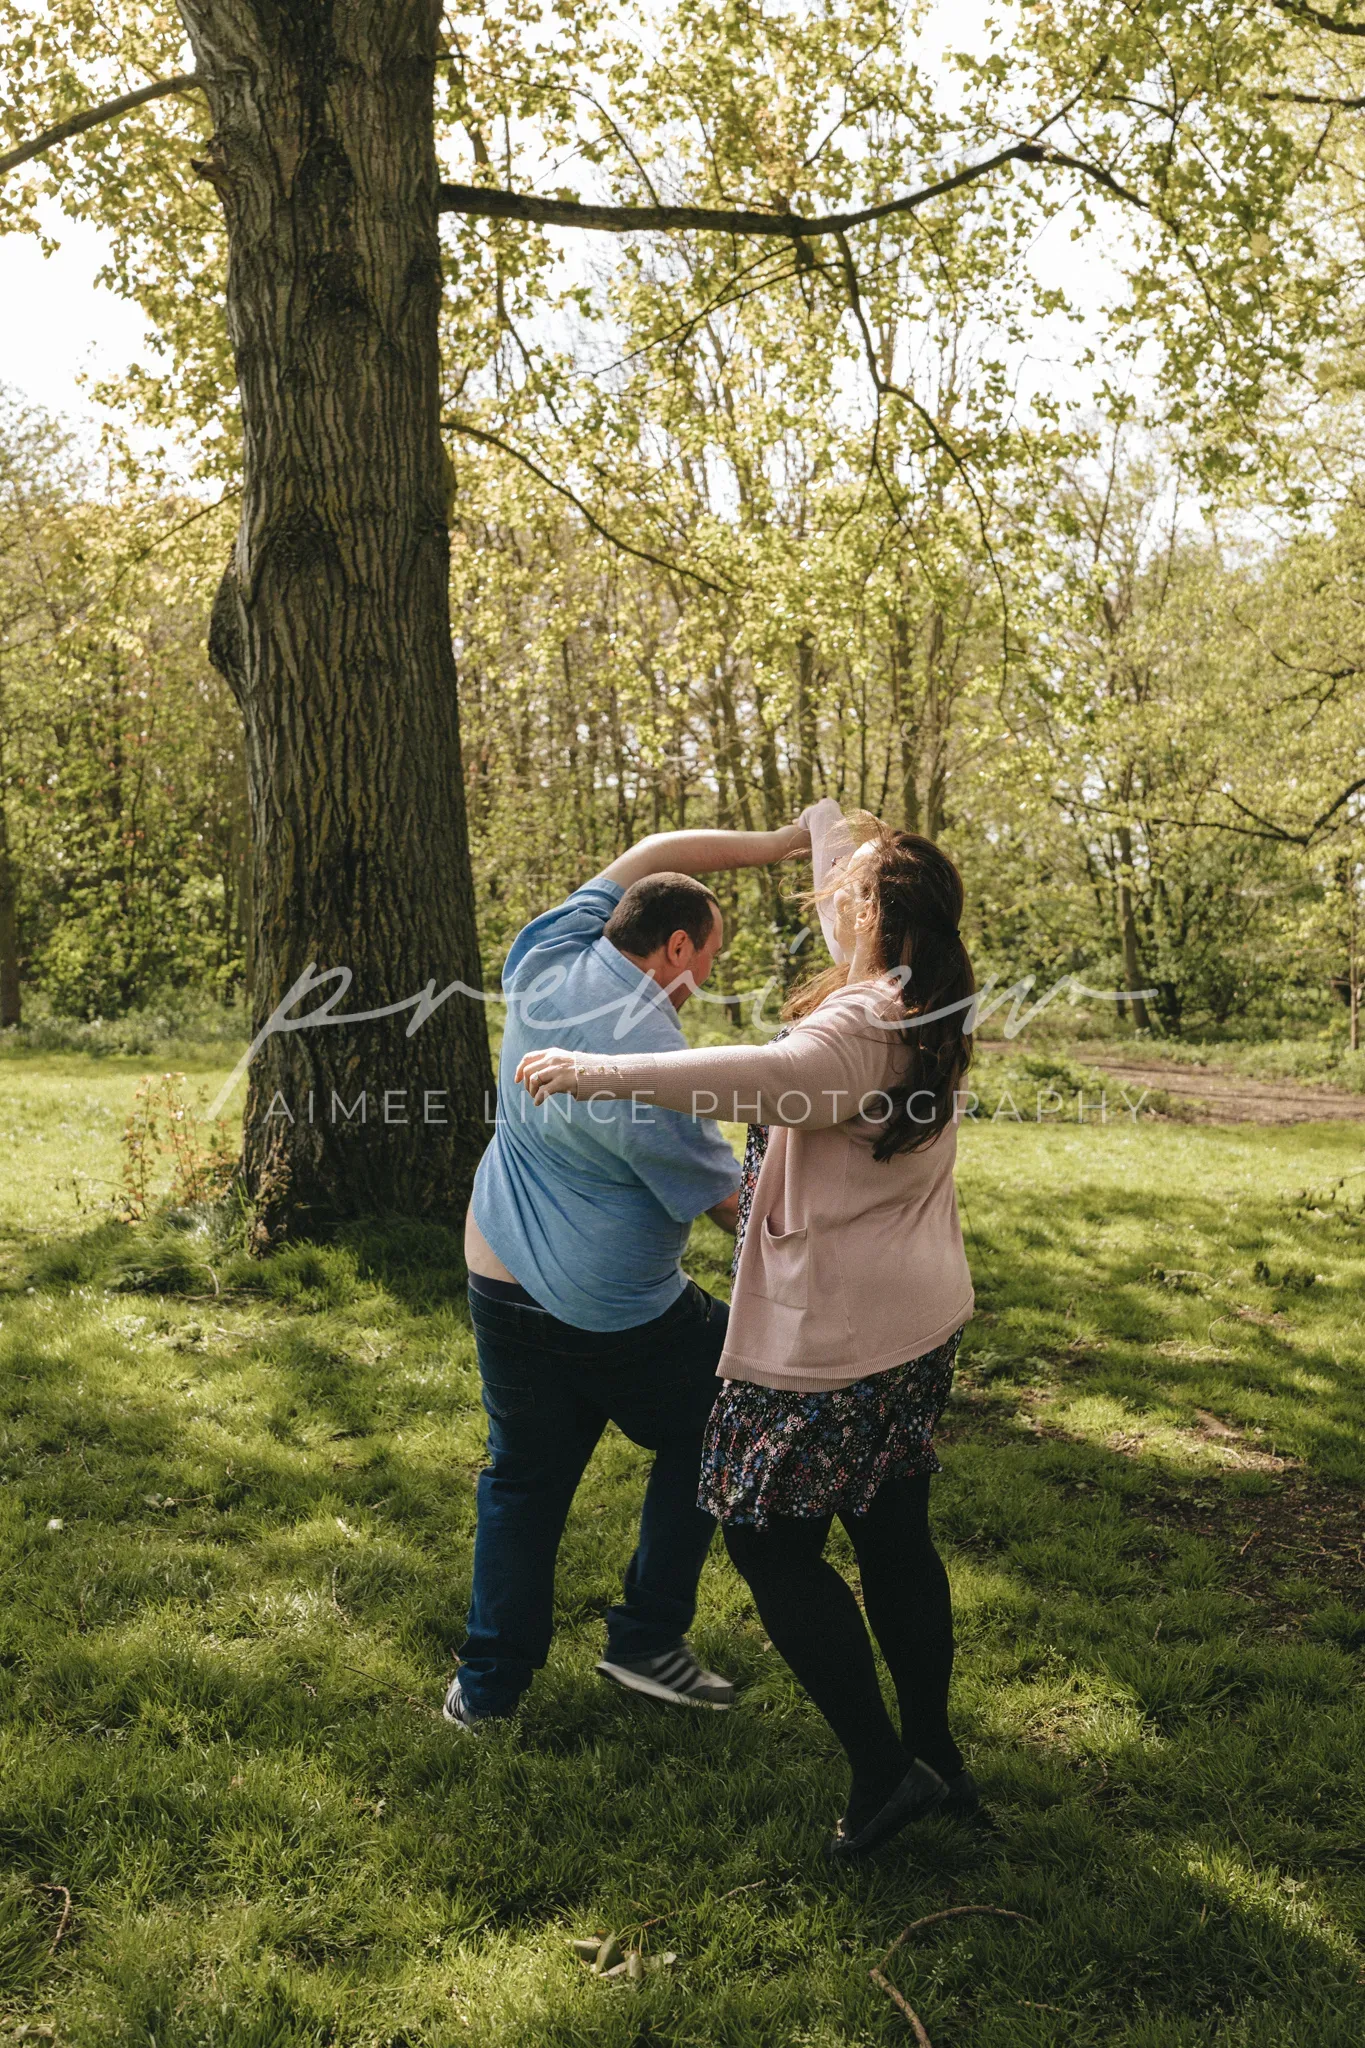 A man and Samantha playfully dance under a large tree in a sunny park. Samantha swings her long hair as the man reaches out to her. They both wear casual spring clothing and are surrounded by lush